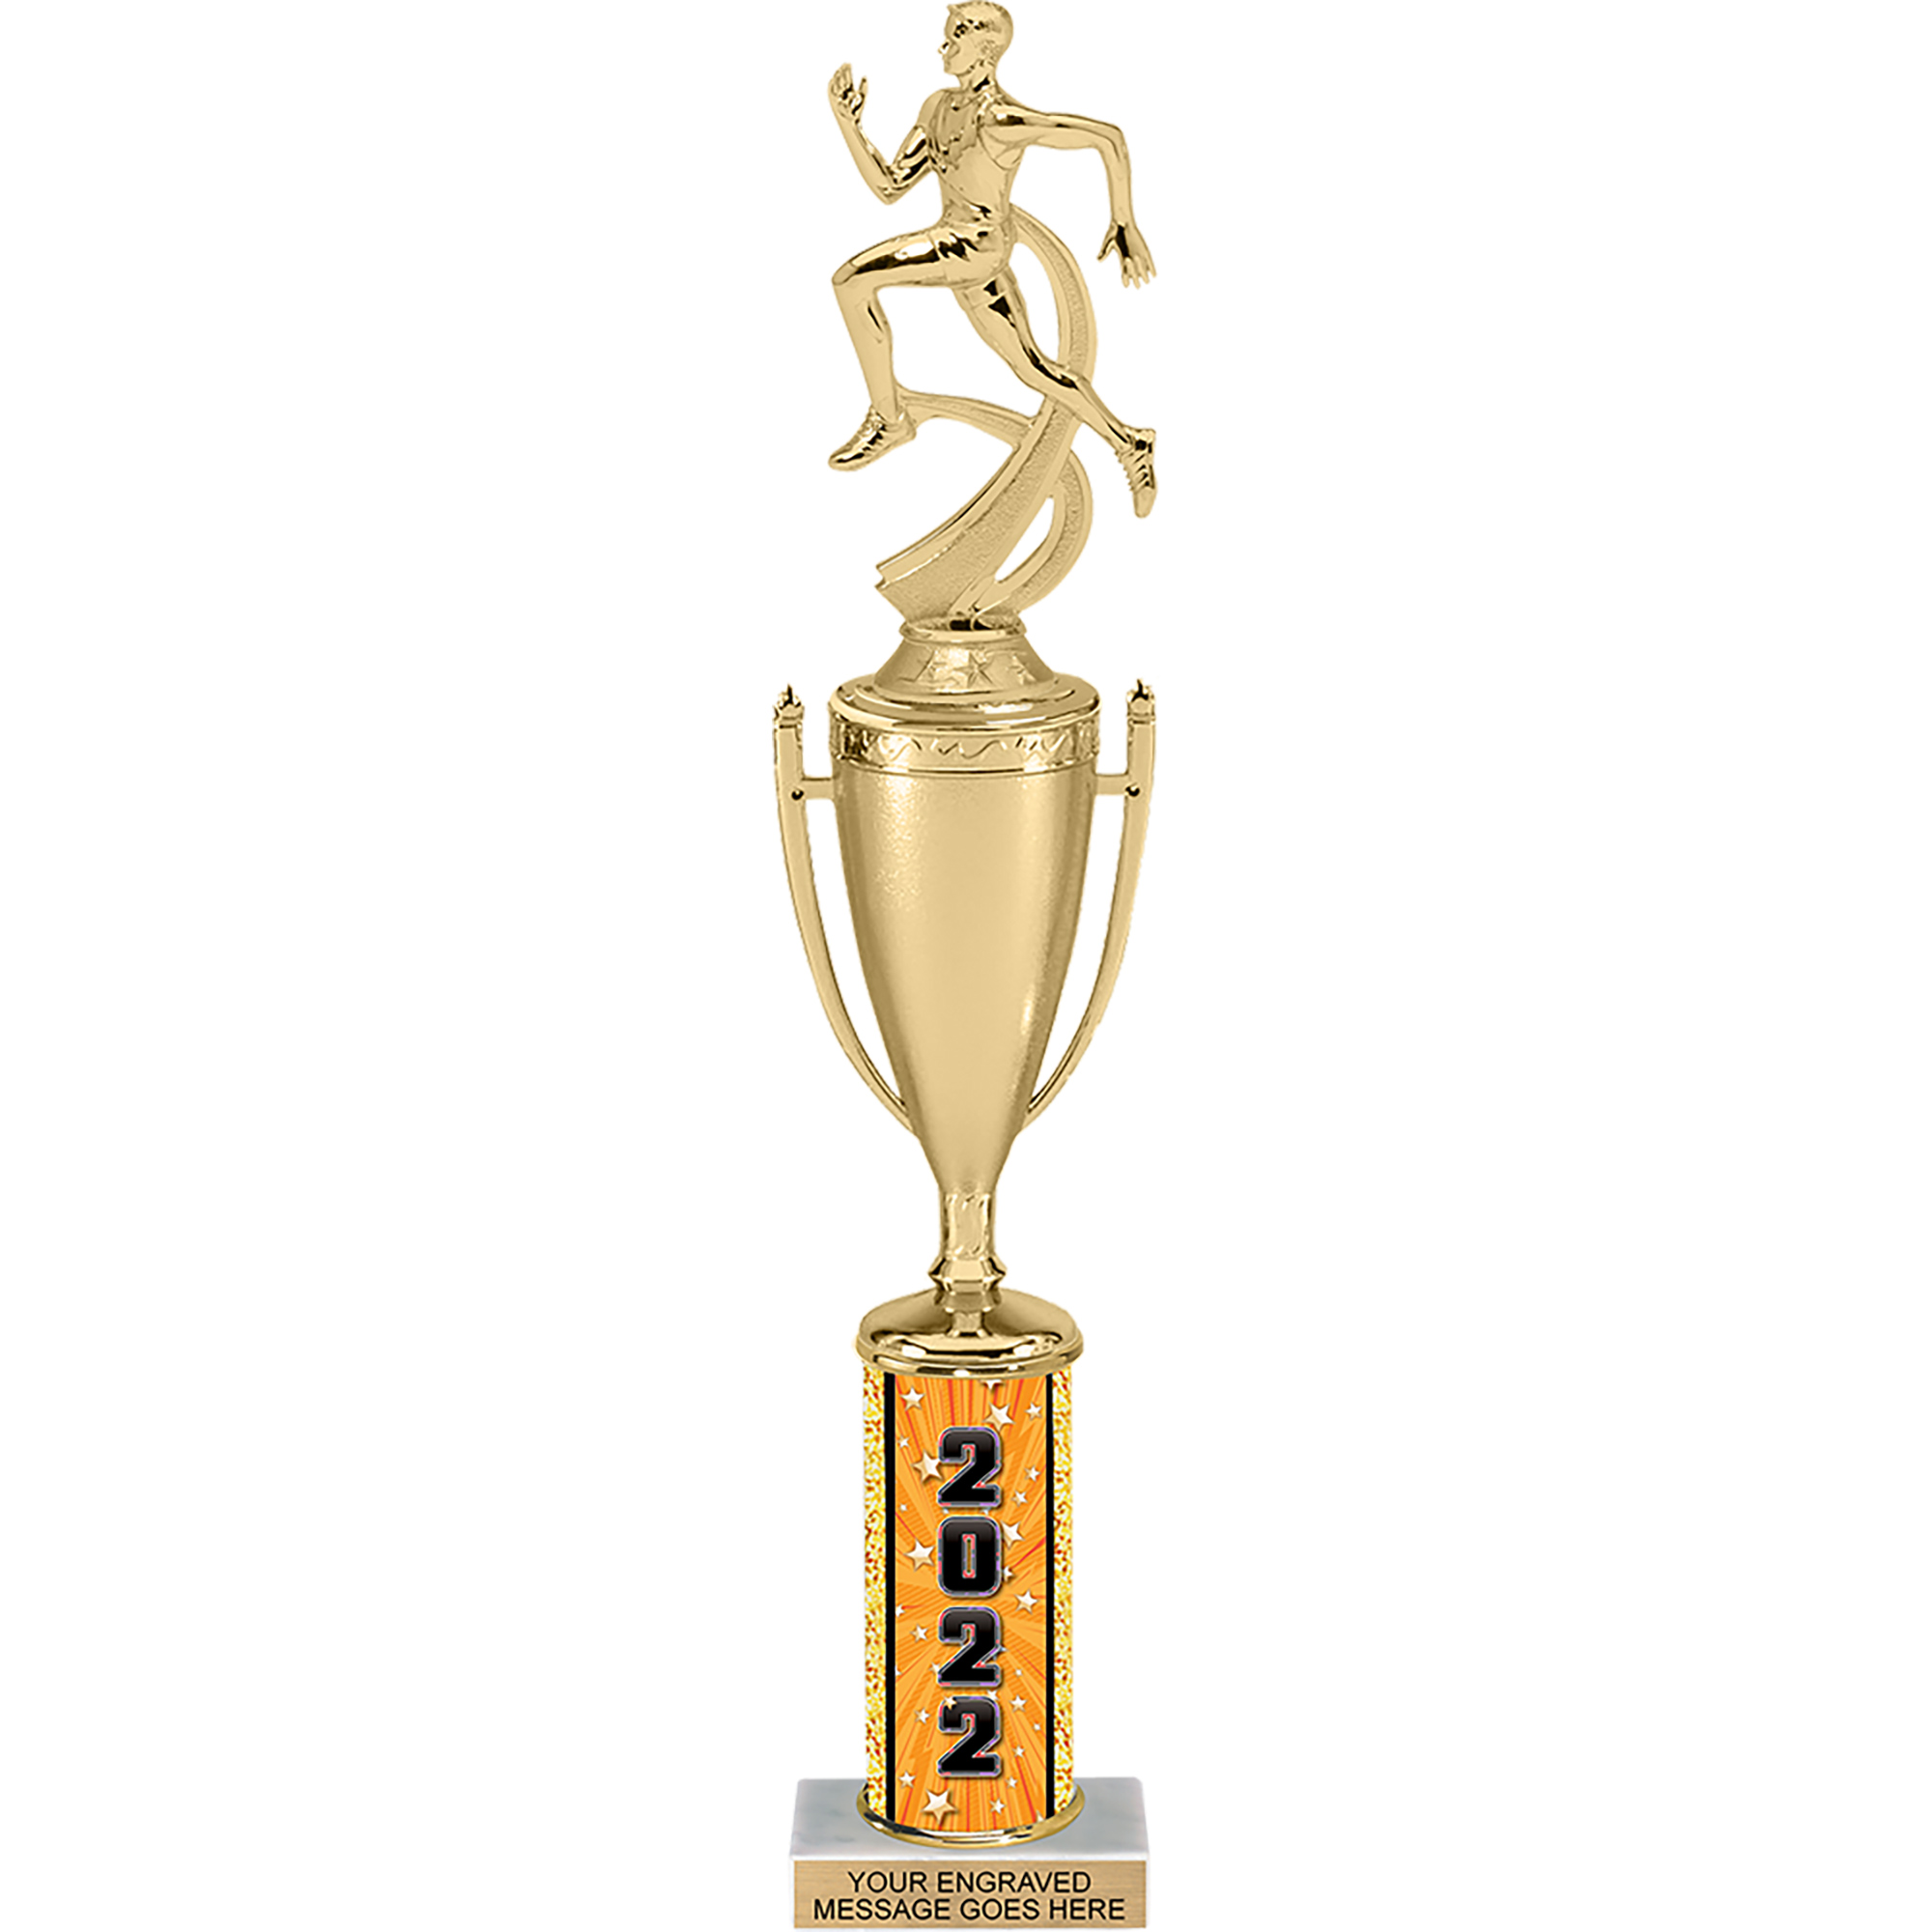 Comic Stars Column Cup Trophy for 2022 - 15 inch